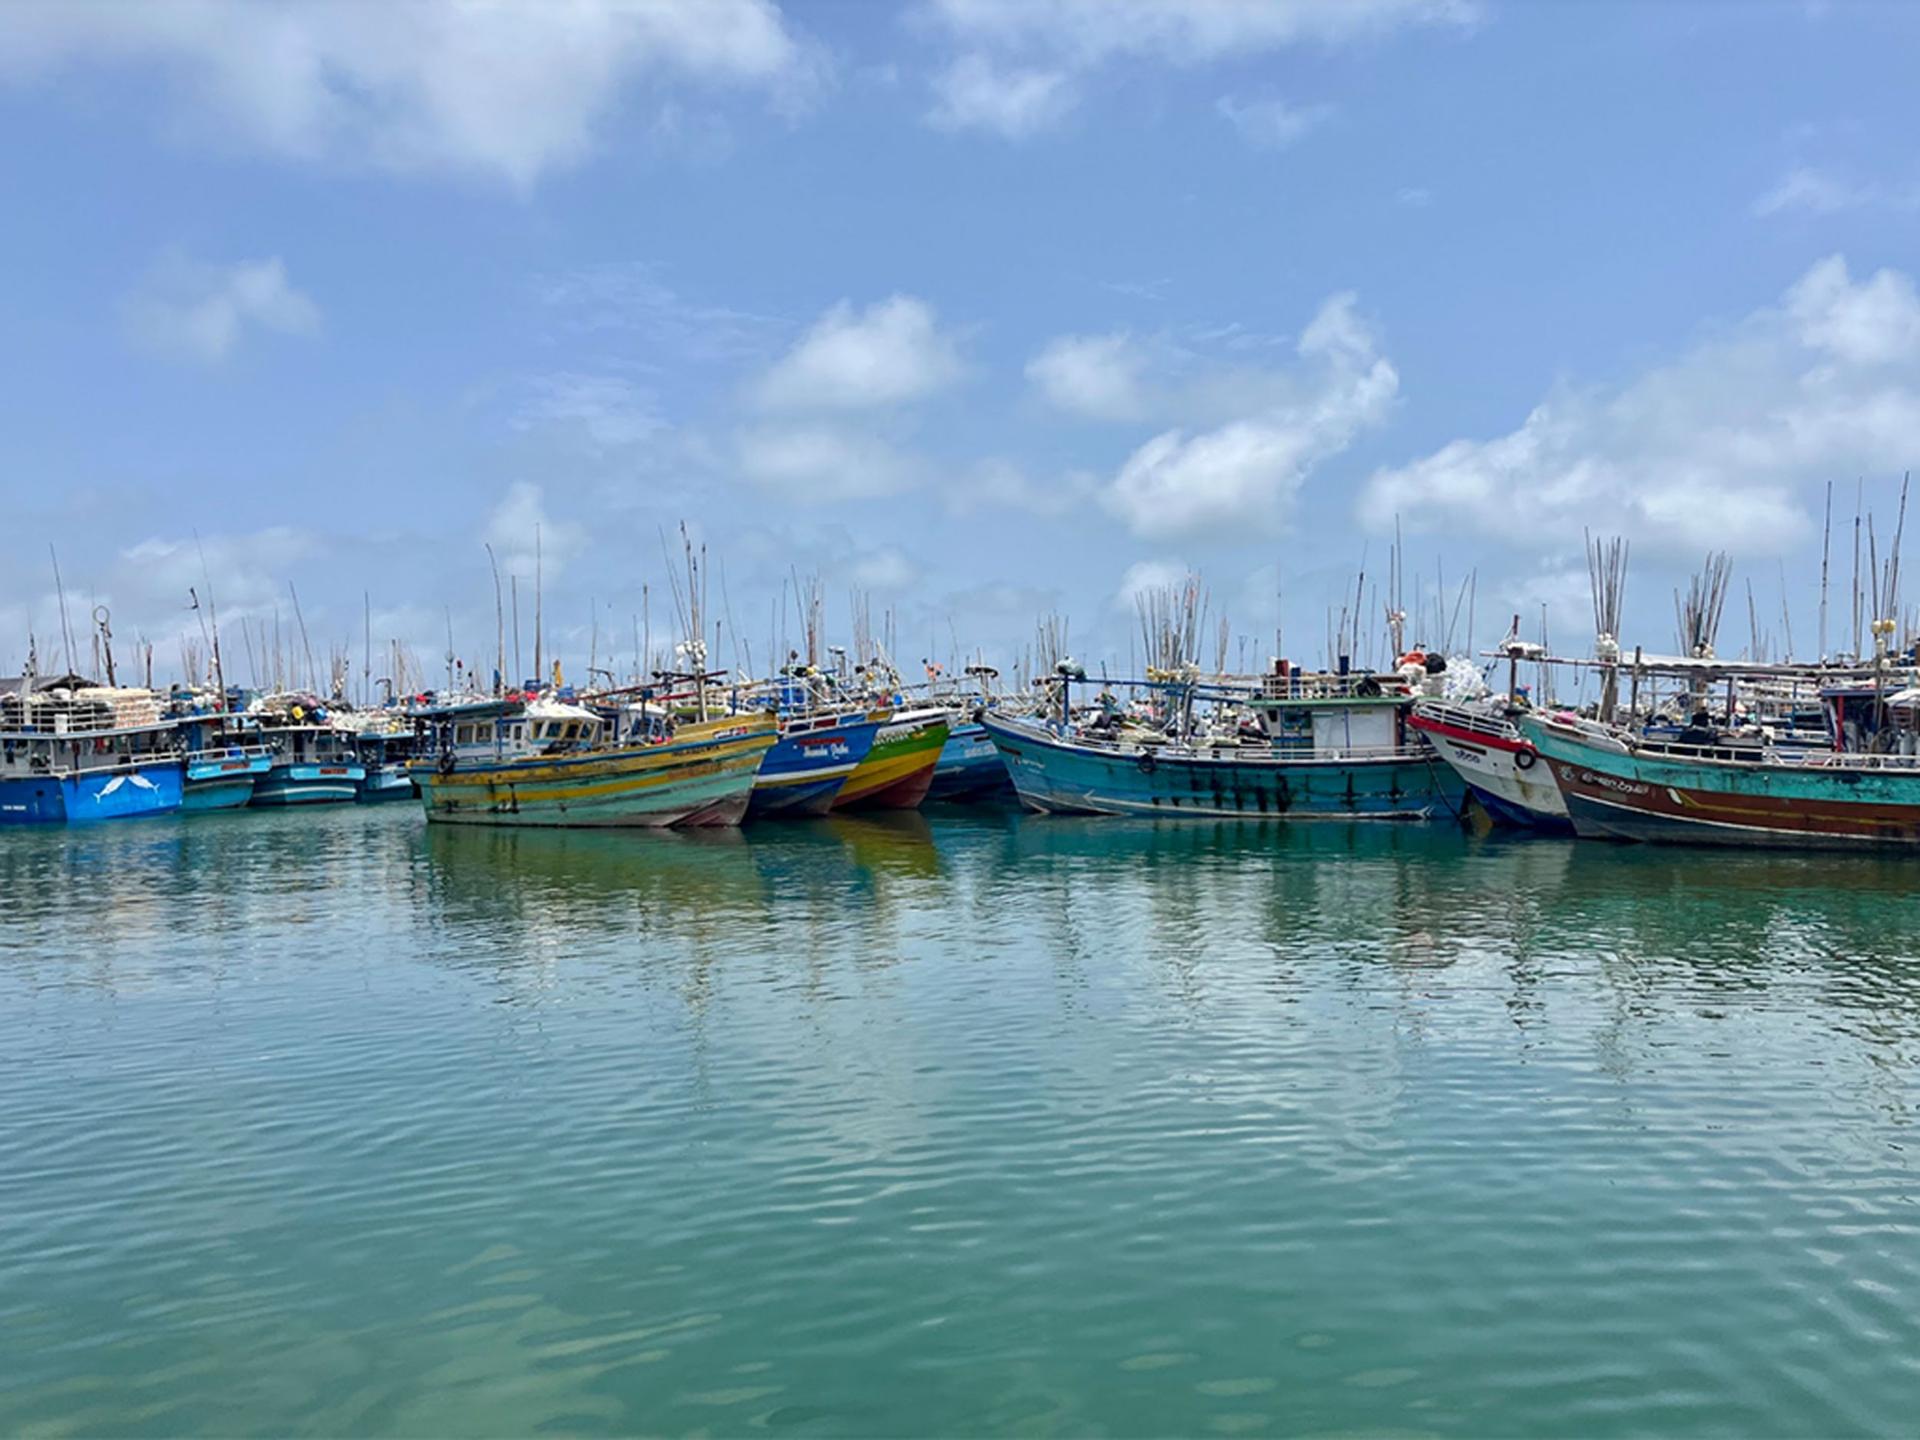 Double the usual number of fishing boats are seen at the Dikkowita Fisheries Harbor, a main harbor in the Colombo area, Sri Lanka.